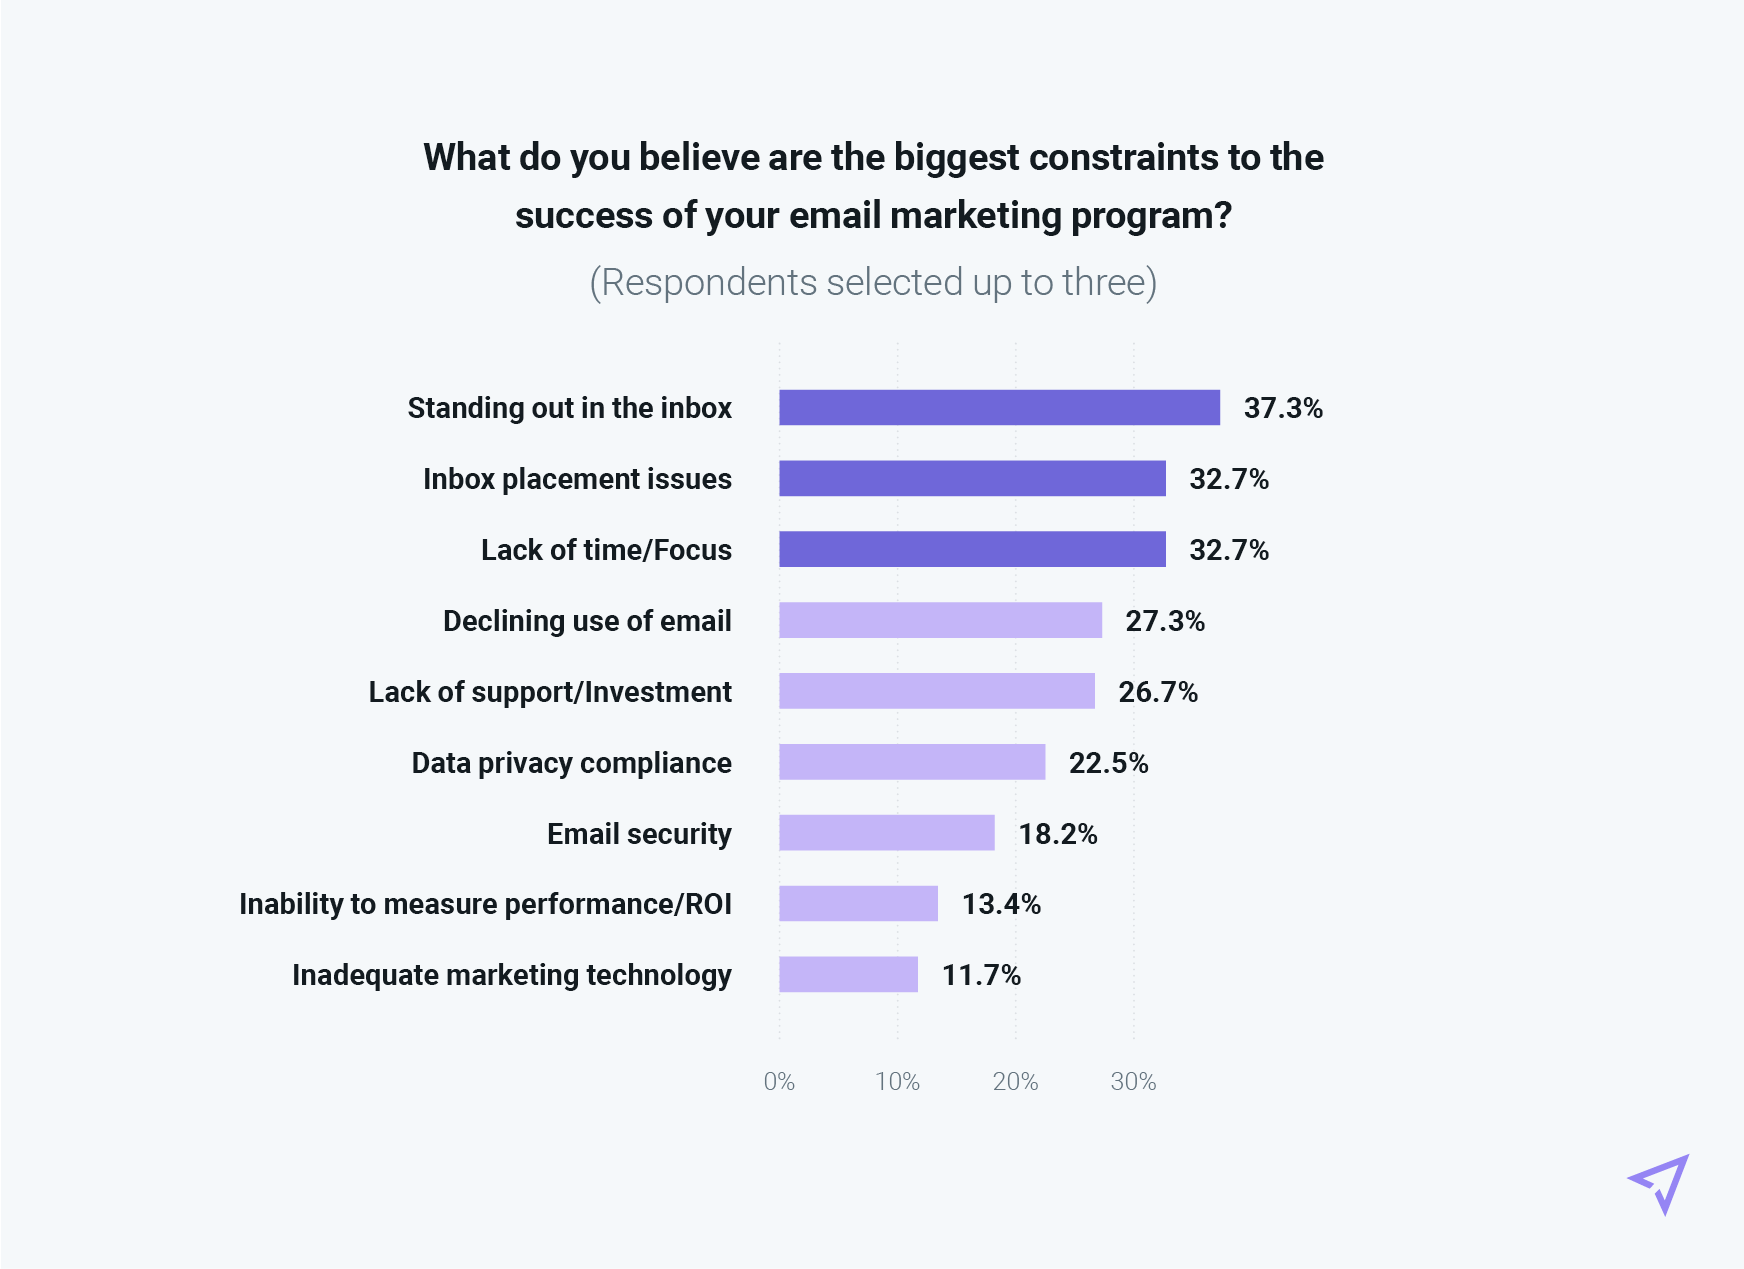 Graph showing results of what respondents believed are biggest constraints to their email marketing program